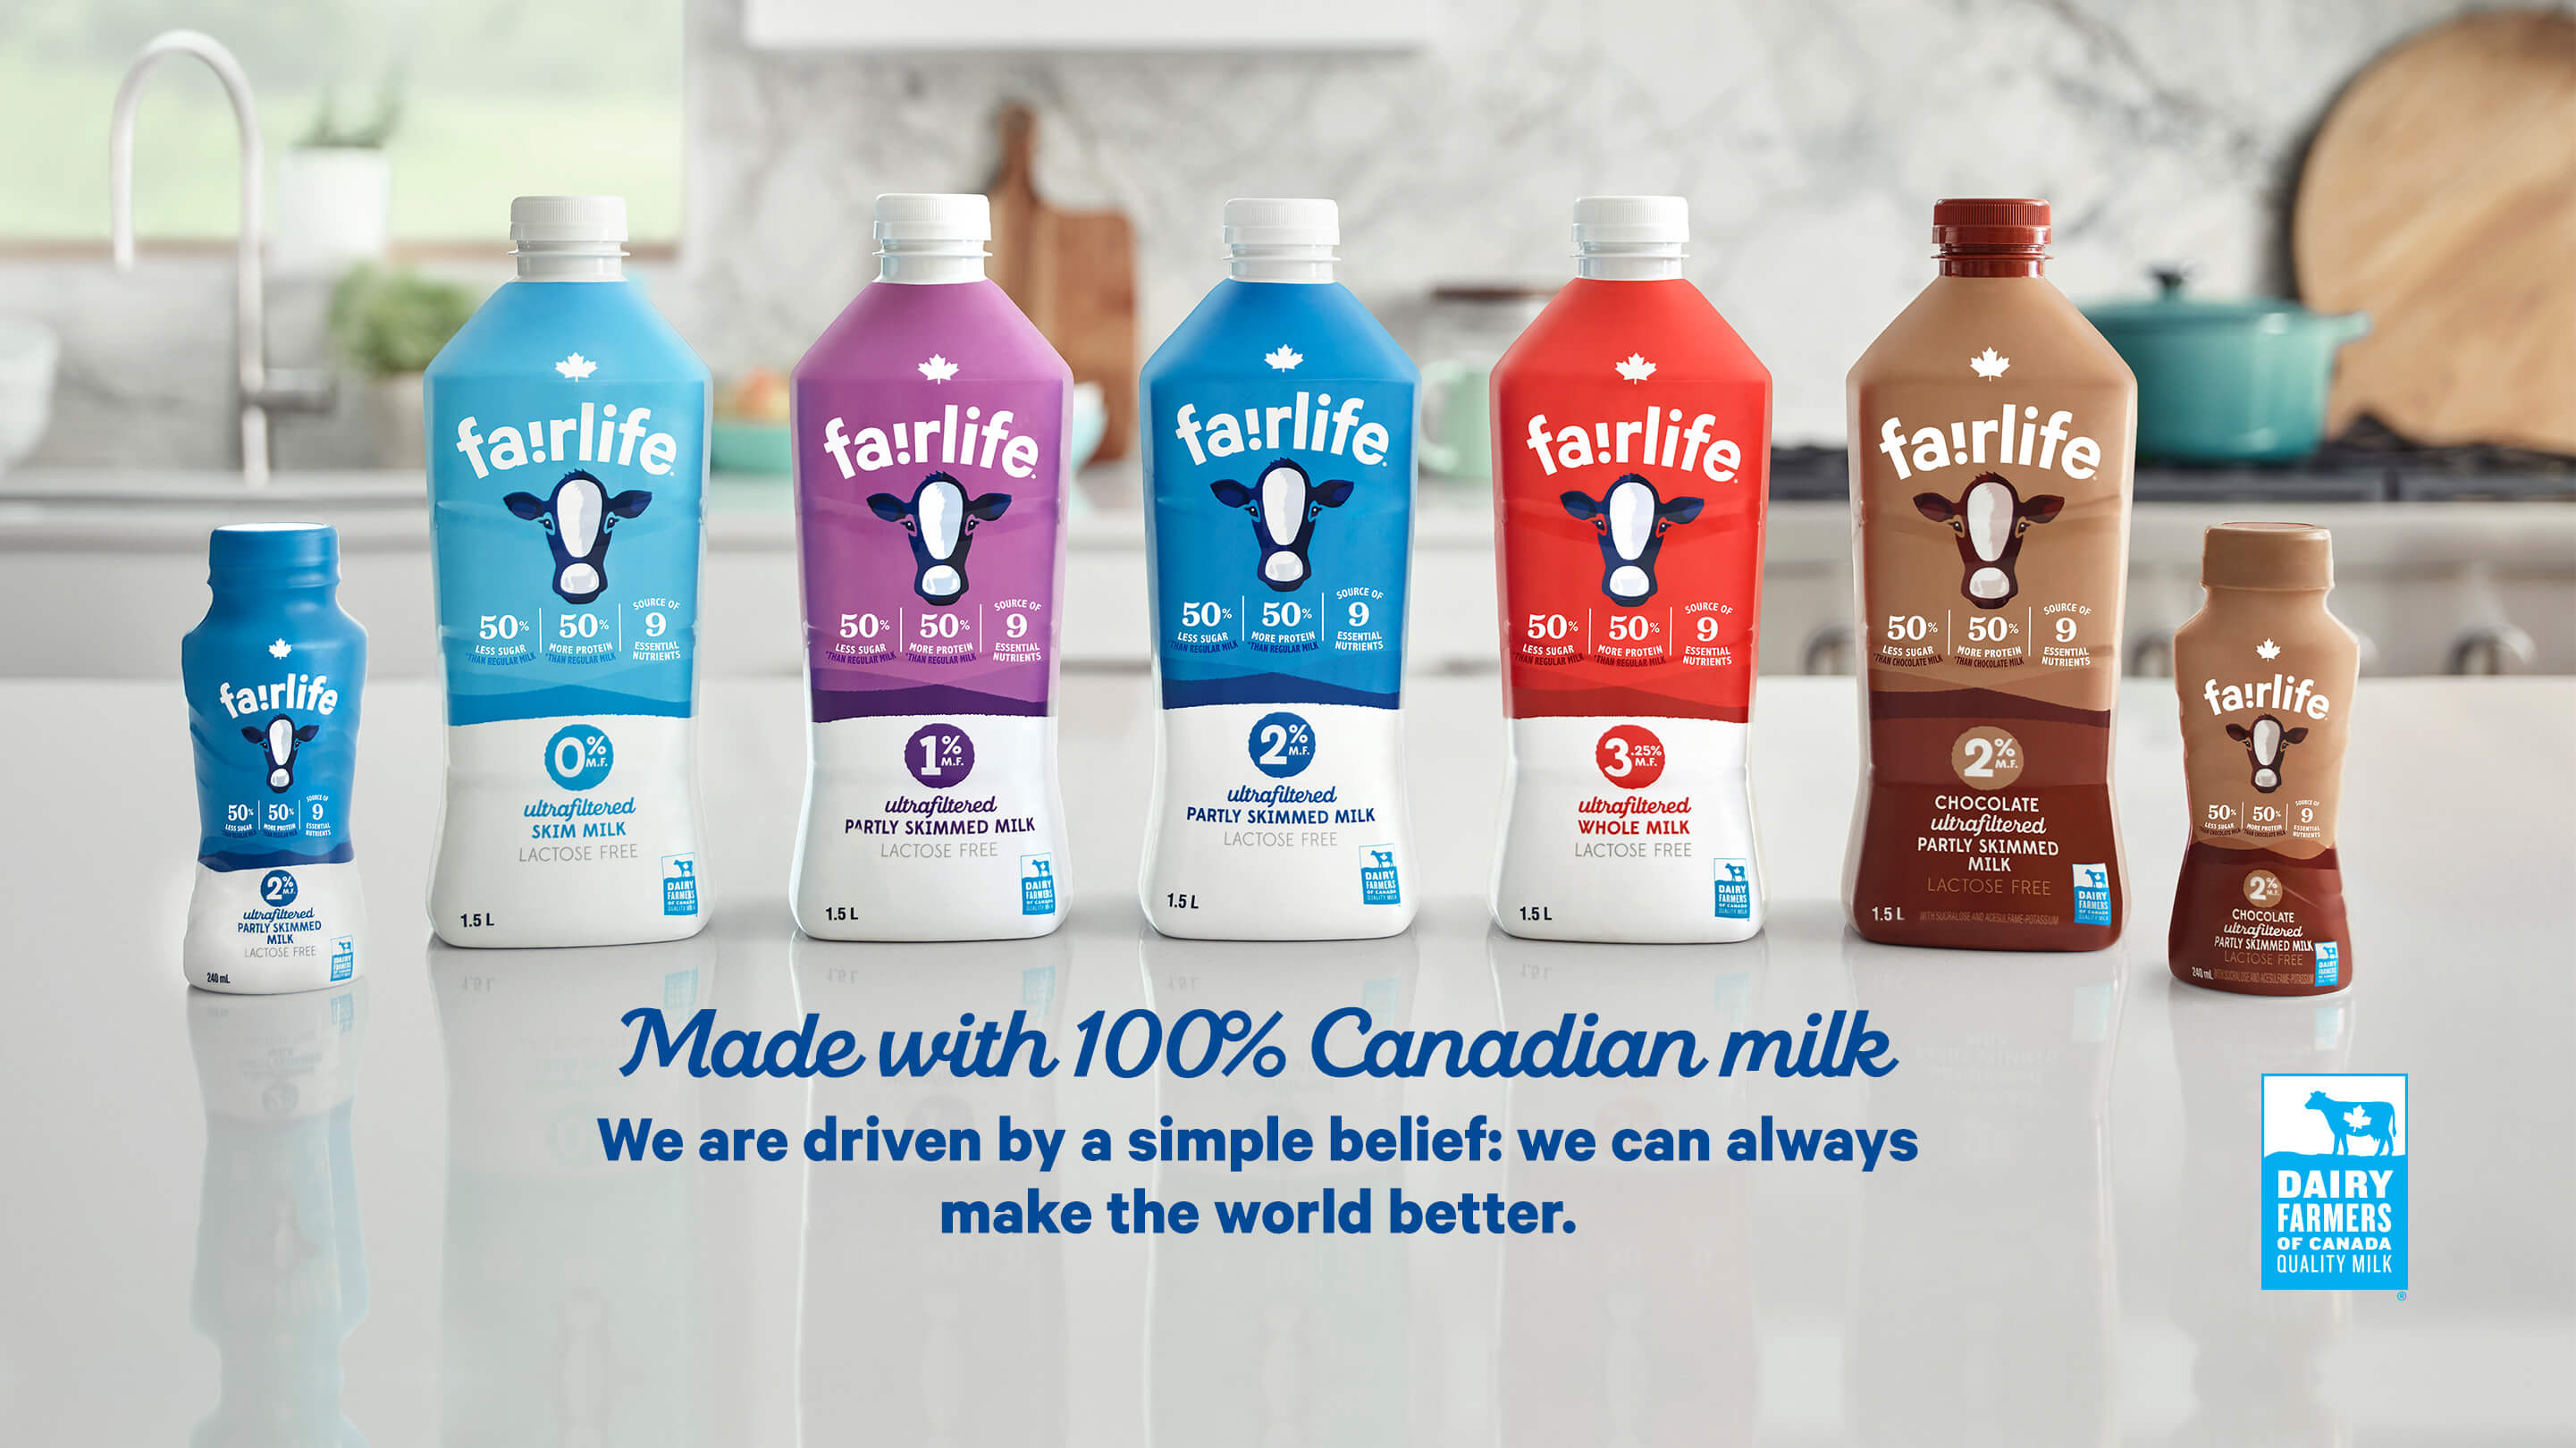 fairlife. Made with 100 % Canadian milk. We are driven by a simple belief: we can always make the world better.